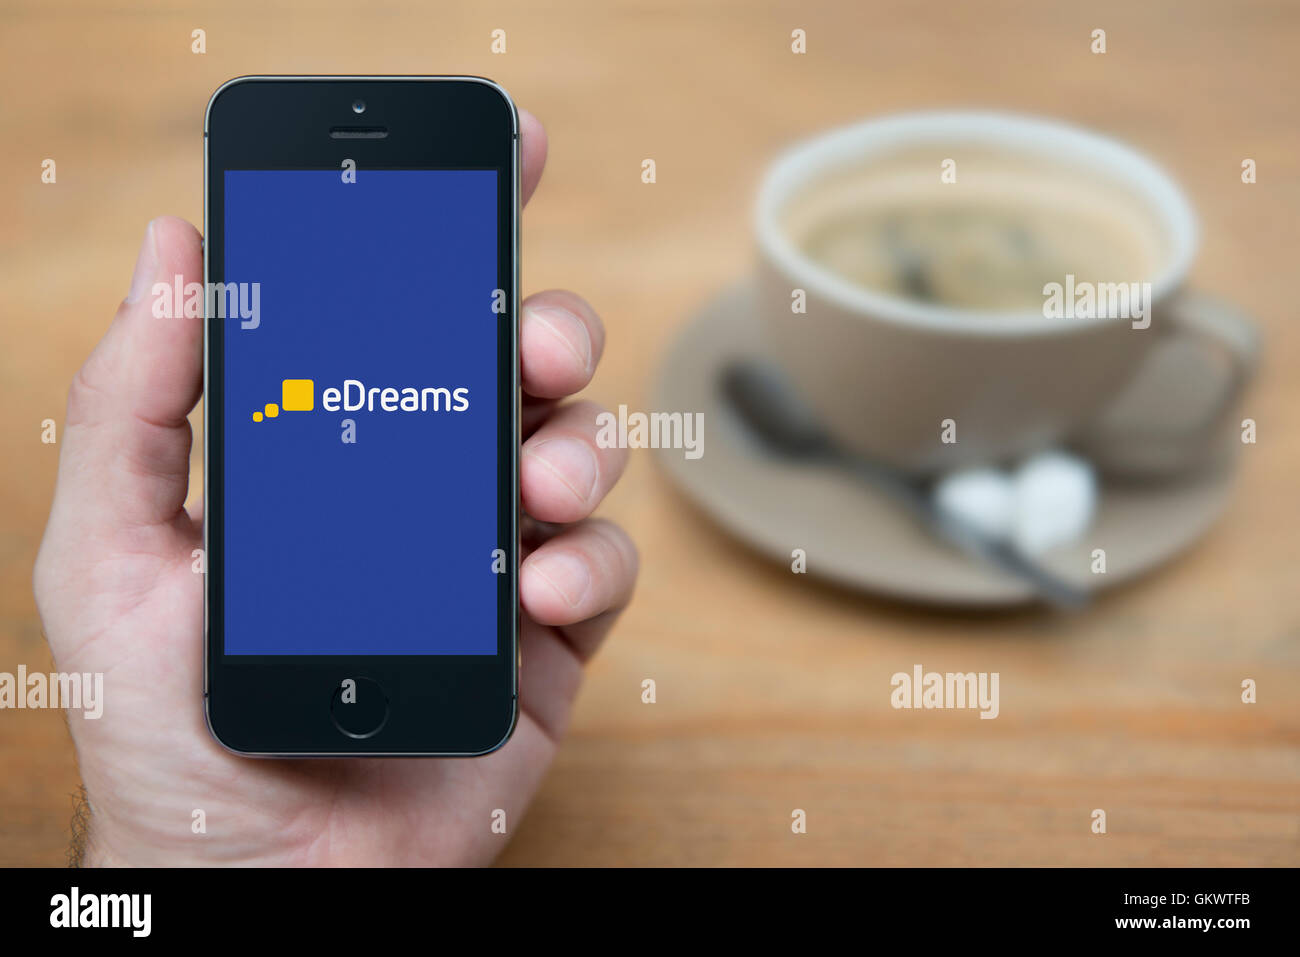 A man looks at his iPhone which displays the eDreams logo, while sat with a cup of coffee (Editorial use only). Stock Photo